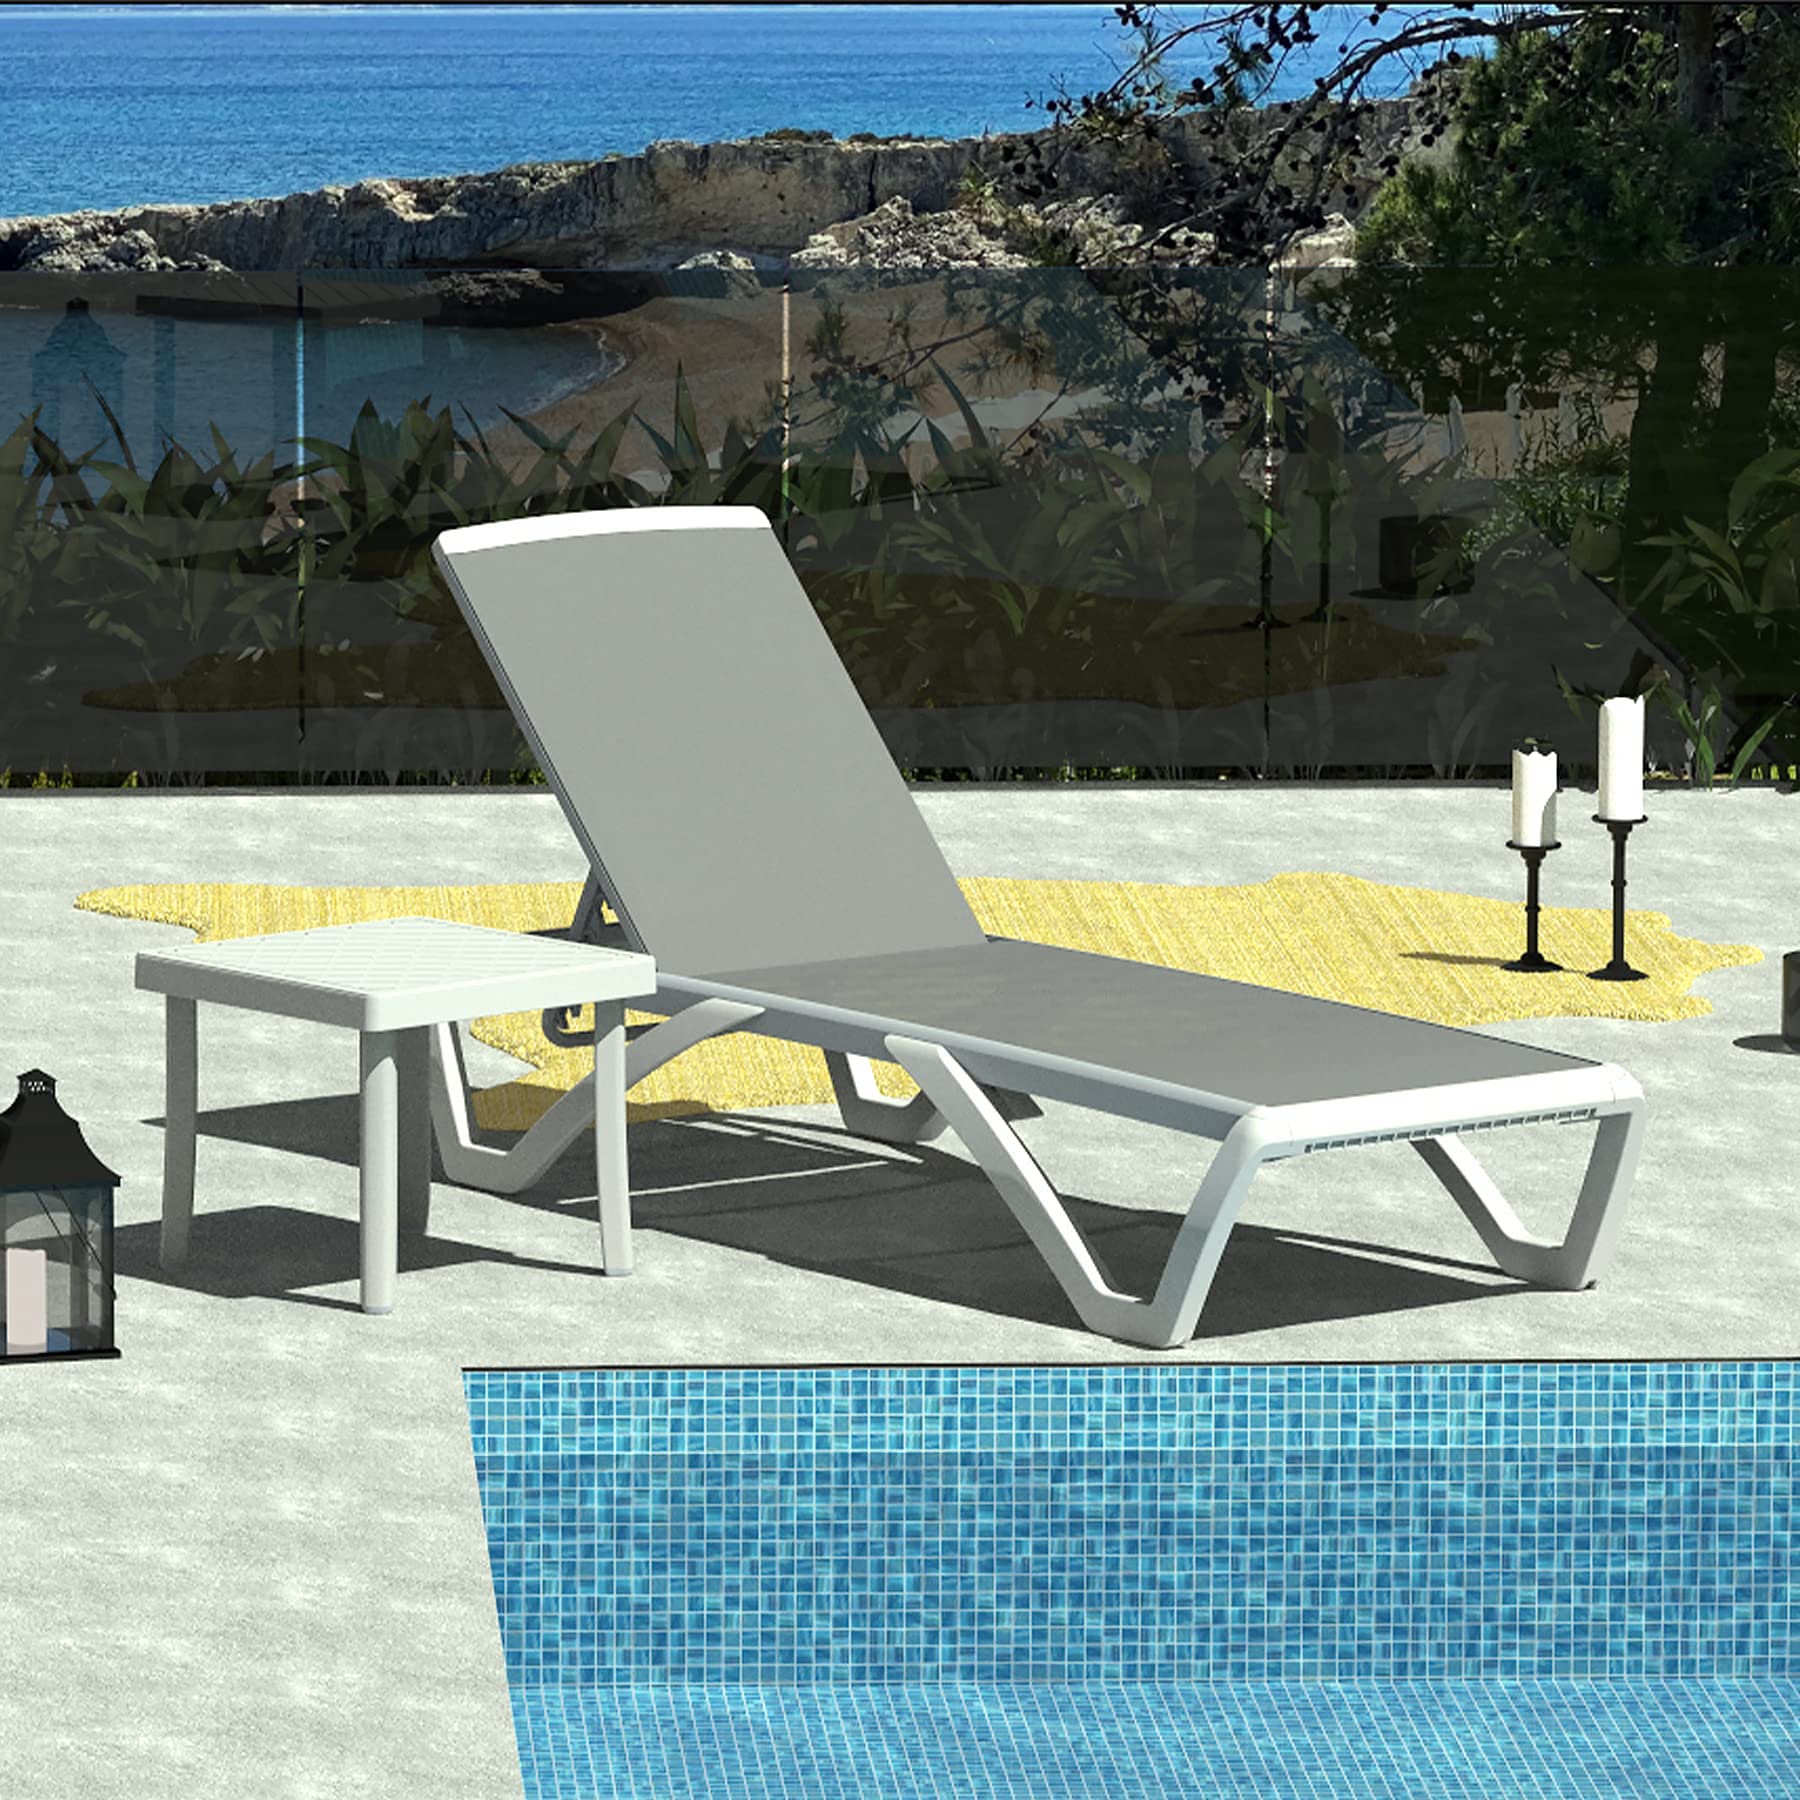 Domi Patio Chaise Lounge, Outdoor Aluminum, Polypropylene, Adjustable Backrest, Beach Patio Chair - image 3 of 7